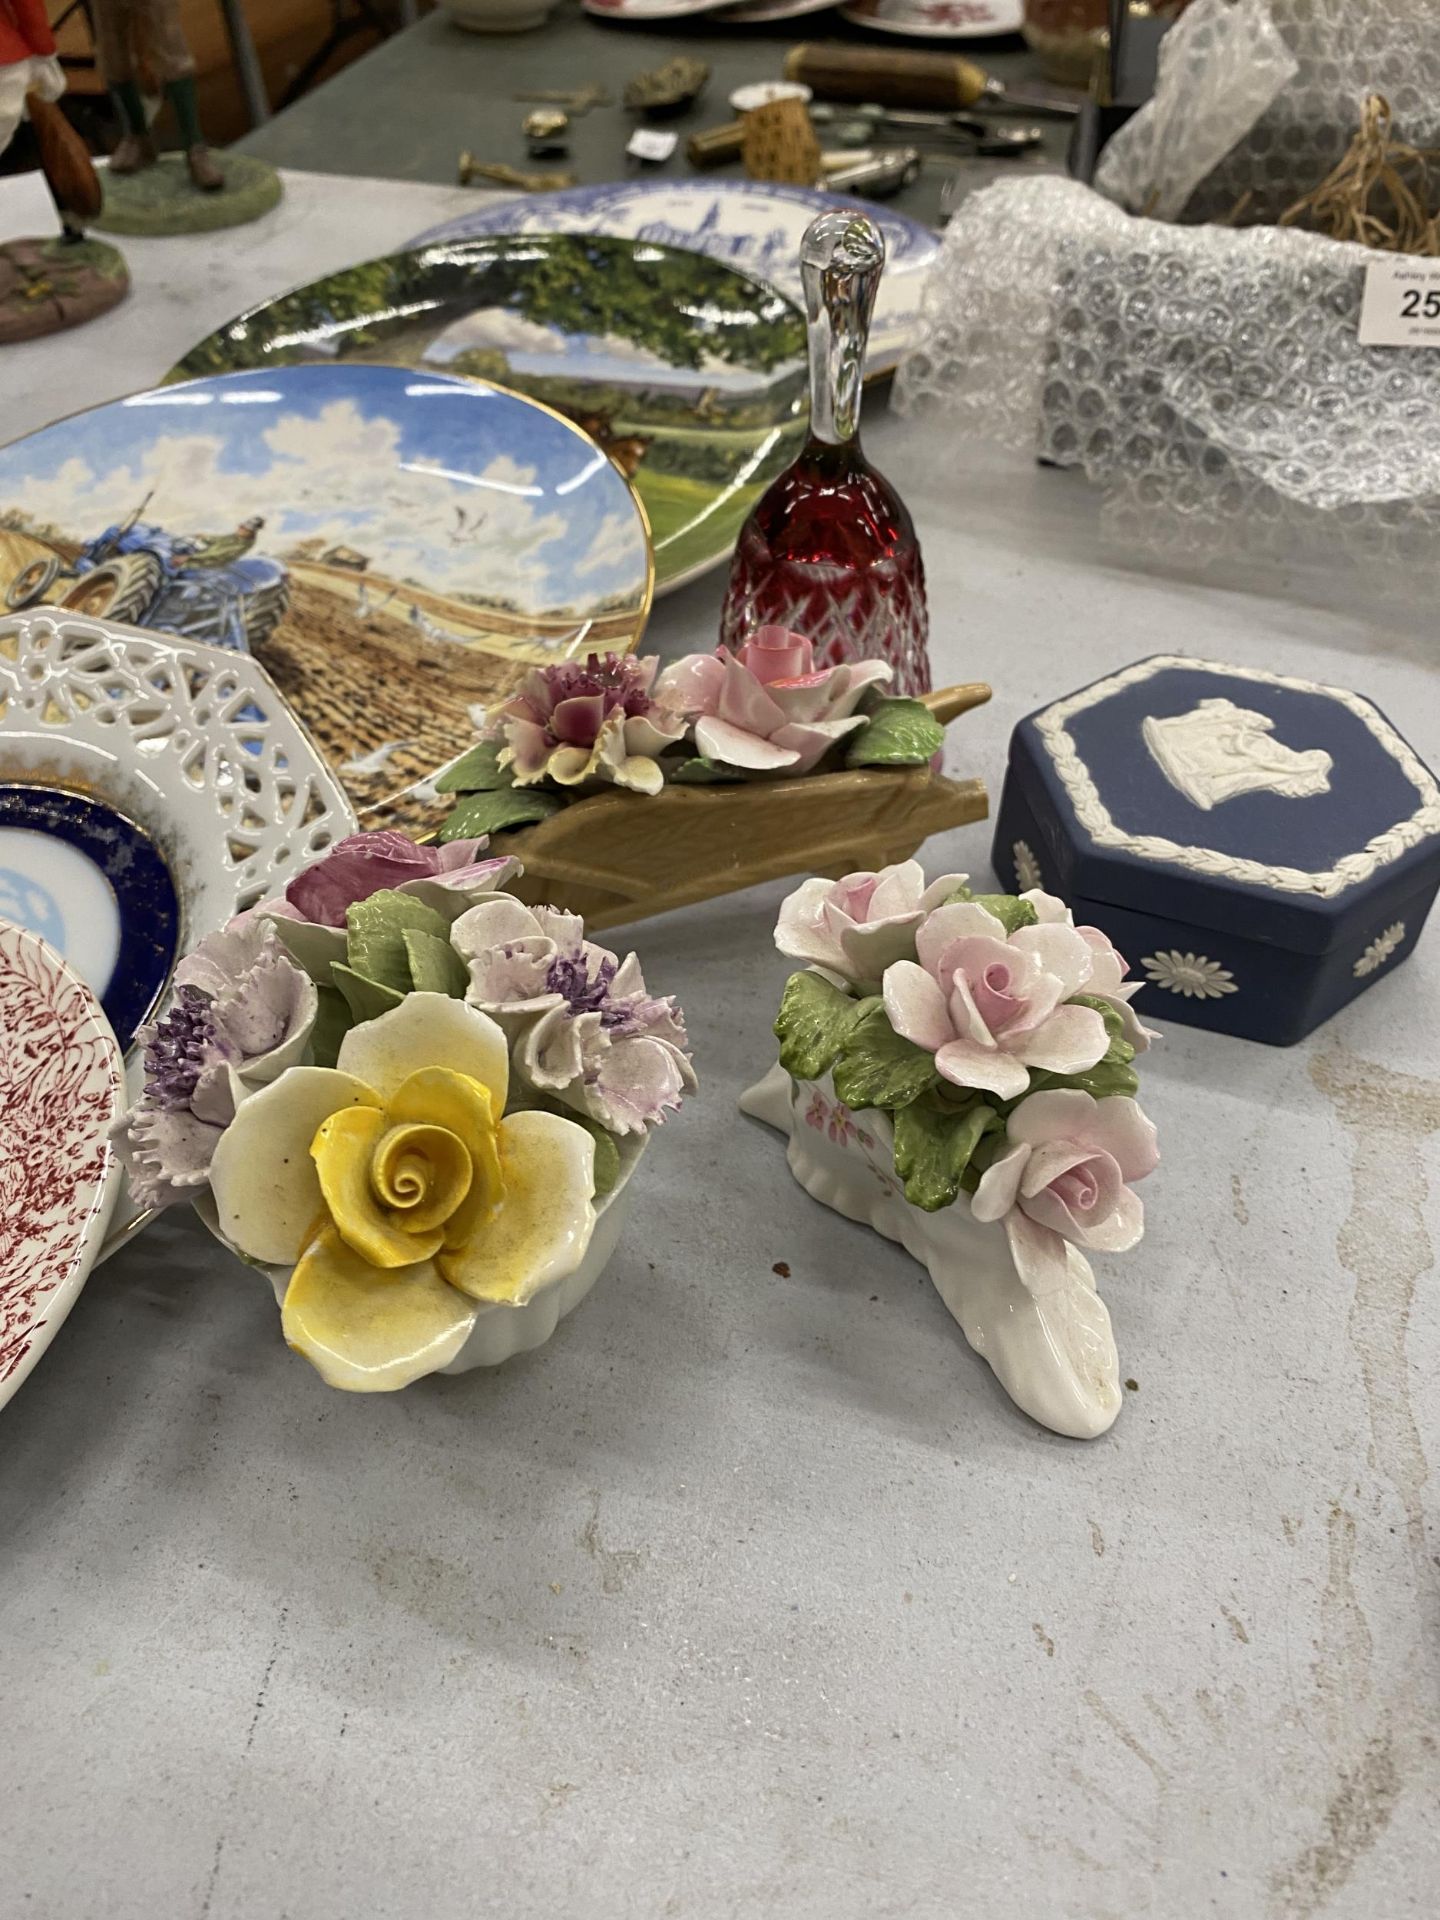 A QUANTITY OF CABINET PLATES, FLOWER POSIES, A WEDGWOOD JASPERWARE TRINKET BOX AND A CRANBERRY GLASS - Image 5 of 5